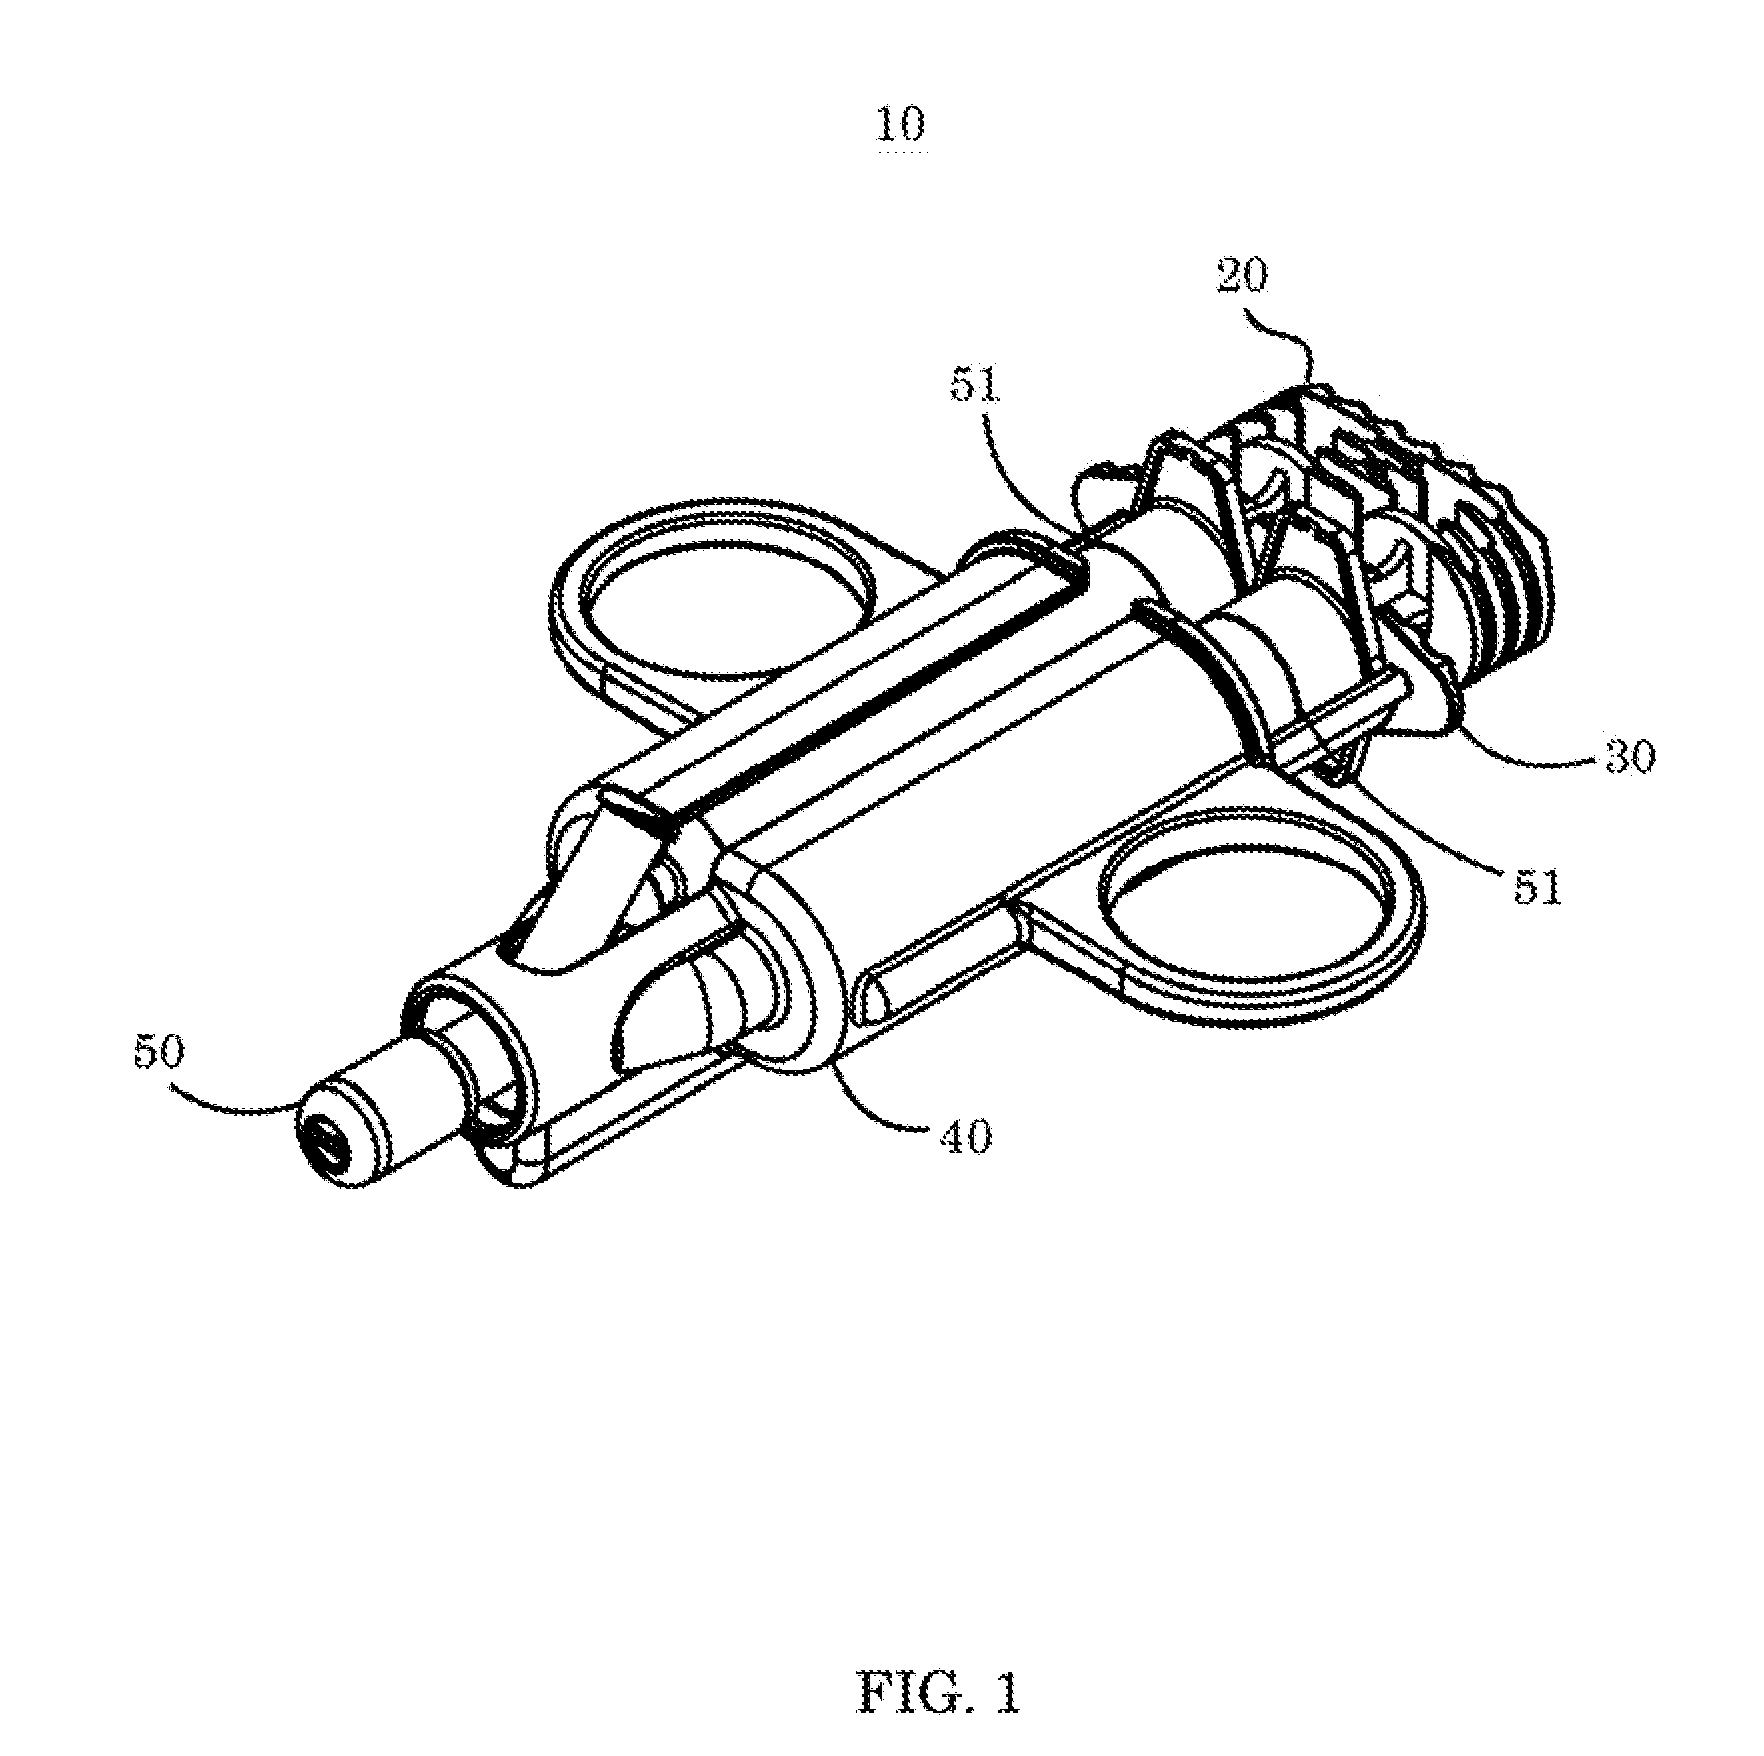 Dual Syringe Delivery Device and Method of Use